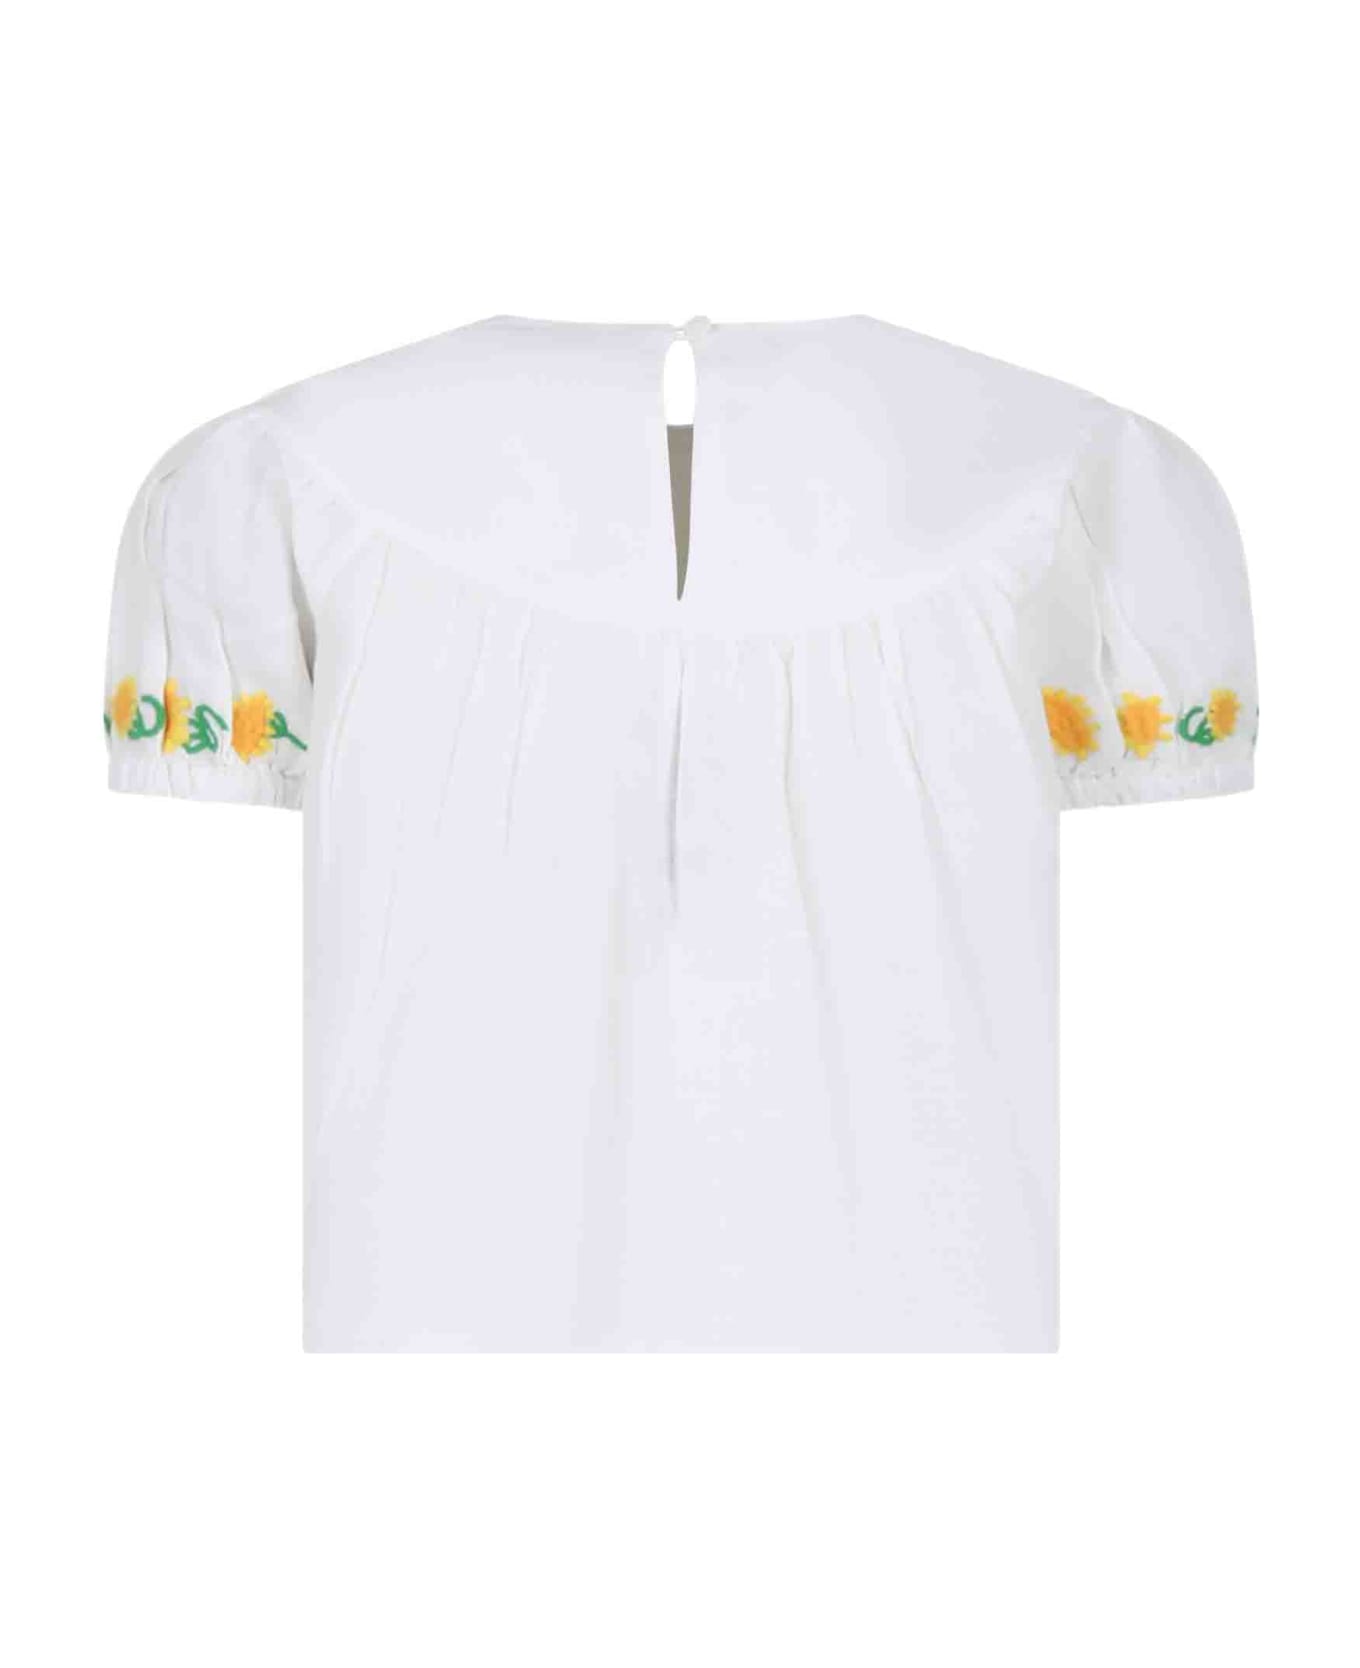 Stella McCartney Kids White Top For Girl With Embroidered Sunflowers - White トップス